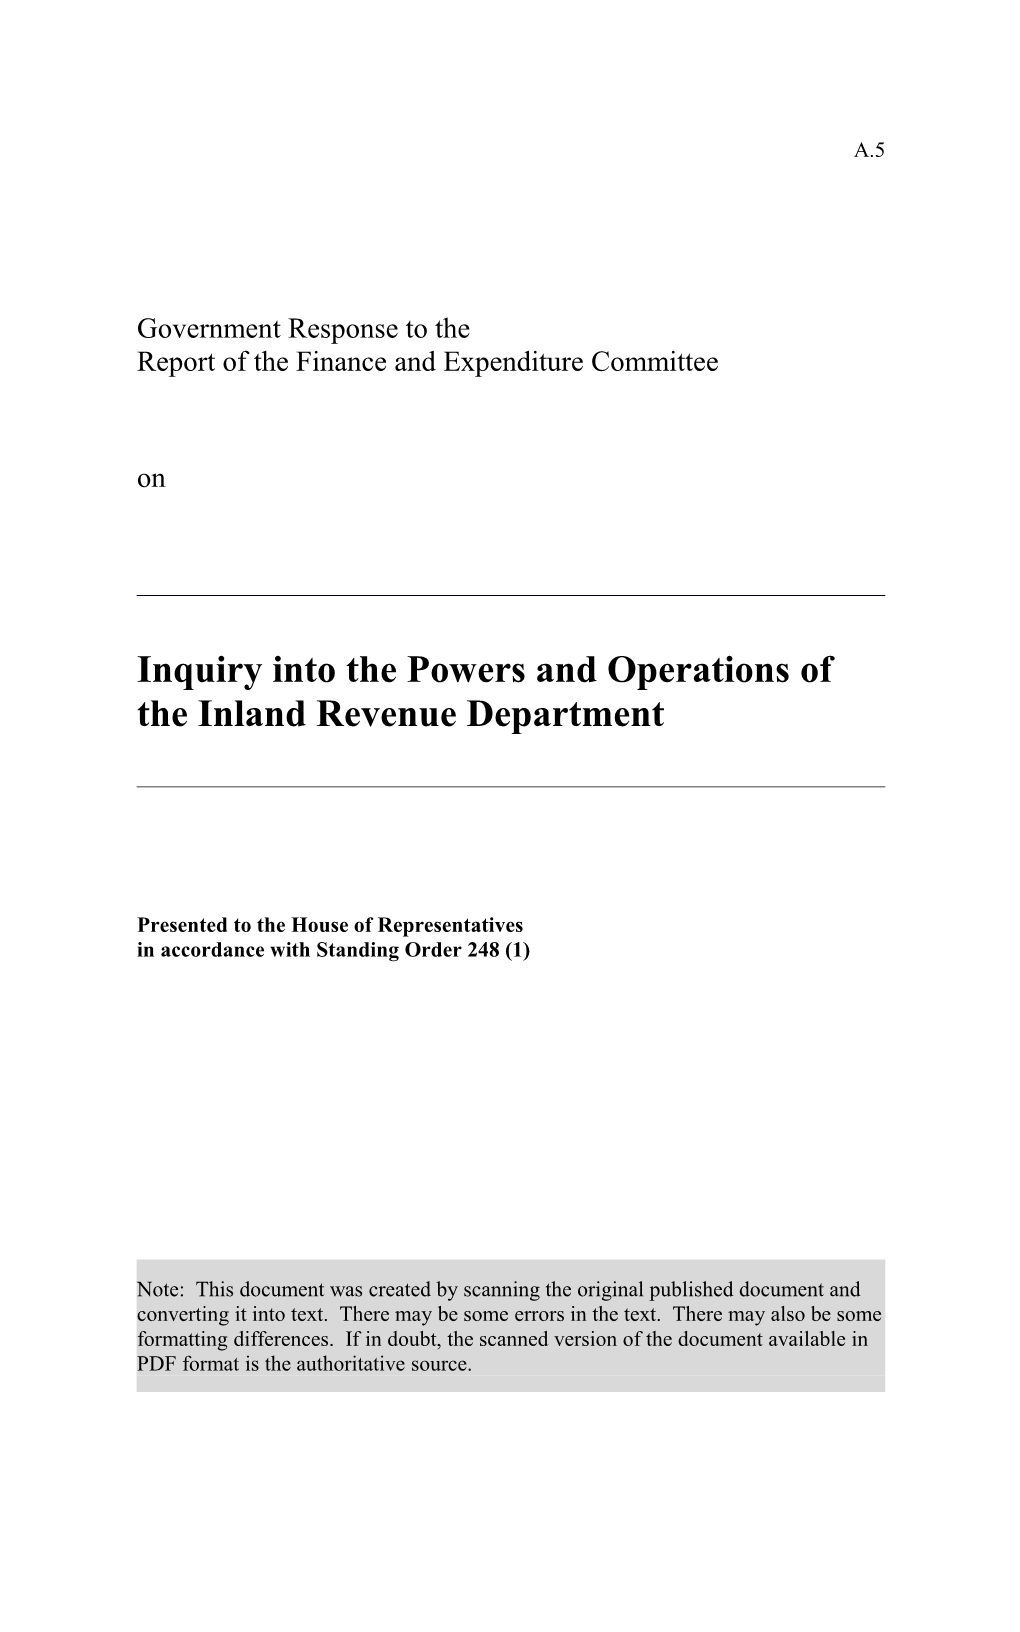 Government Response to the Report of the Finance and Expenditure Committee on the Inquiry